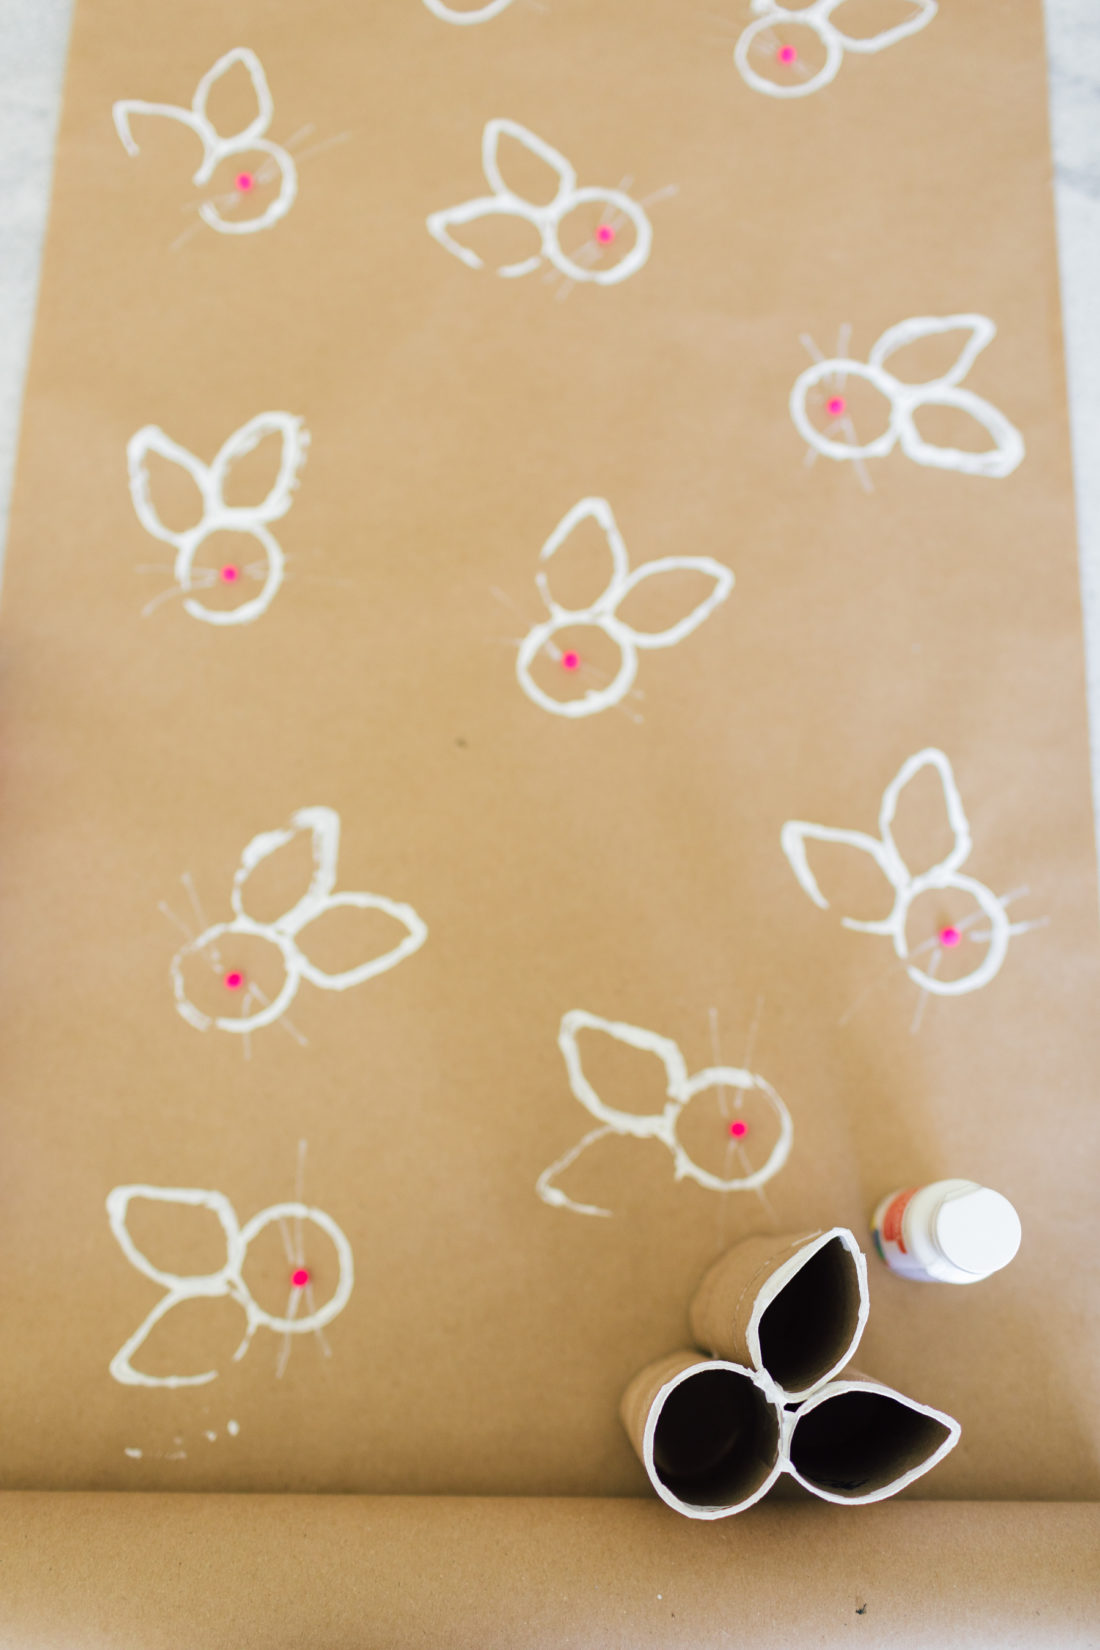 Eva Amurri Martino stamps bunnies onto wrapping paper for Easter